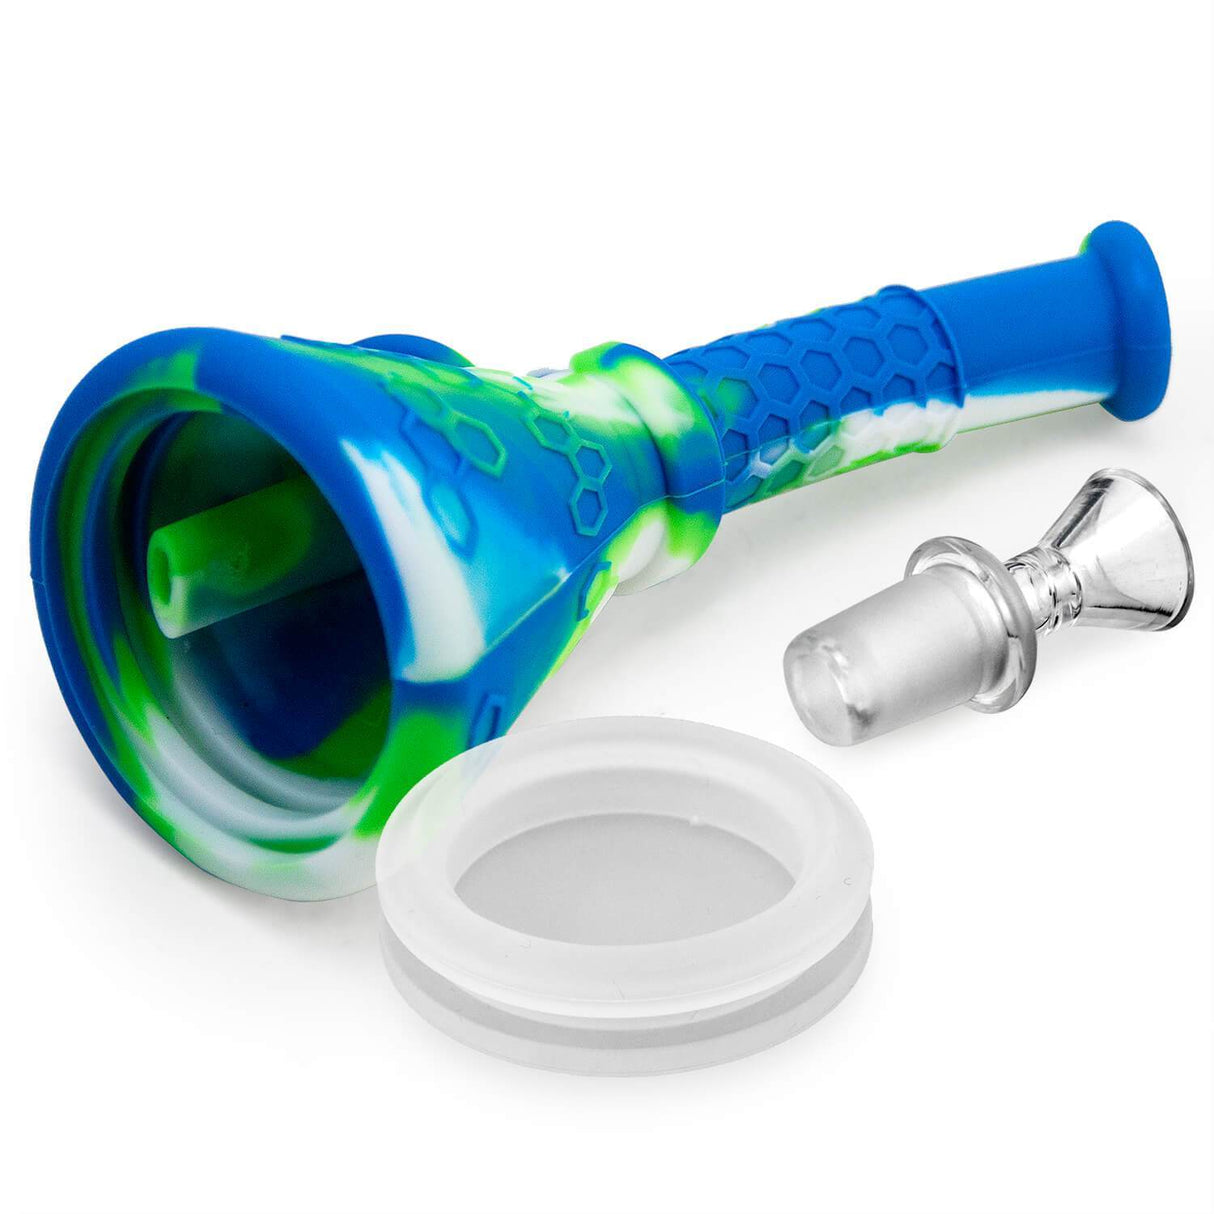 PILOT DIARY Silicone Beaker Bong in Blue and Green - Side View with Glass Bowl